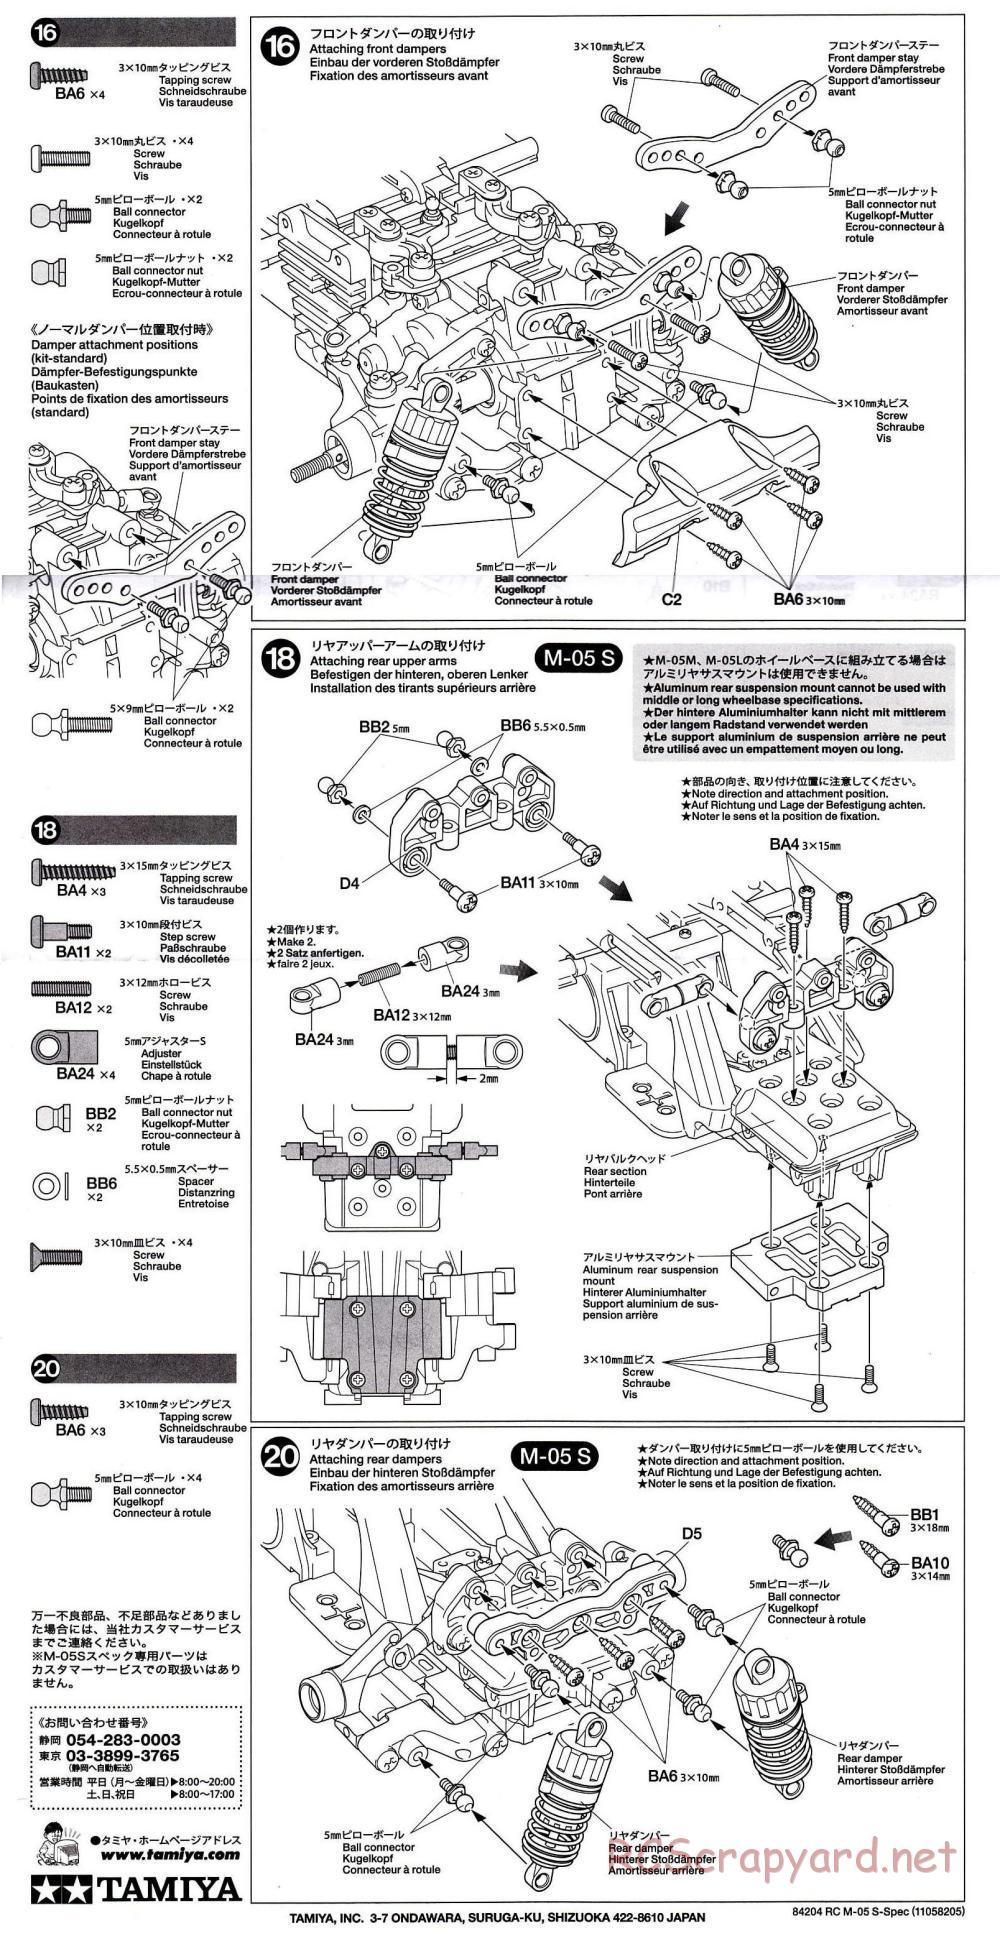 Tamiya - M-05 S-Spec Chassis - Manual - Page 3